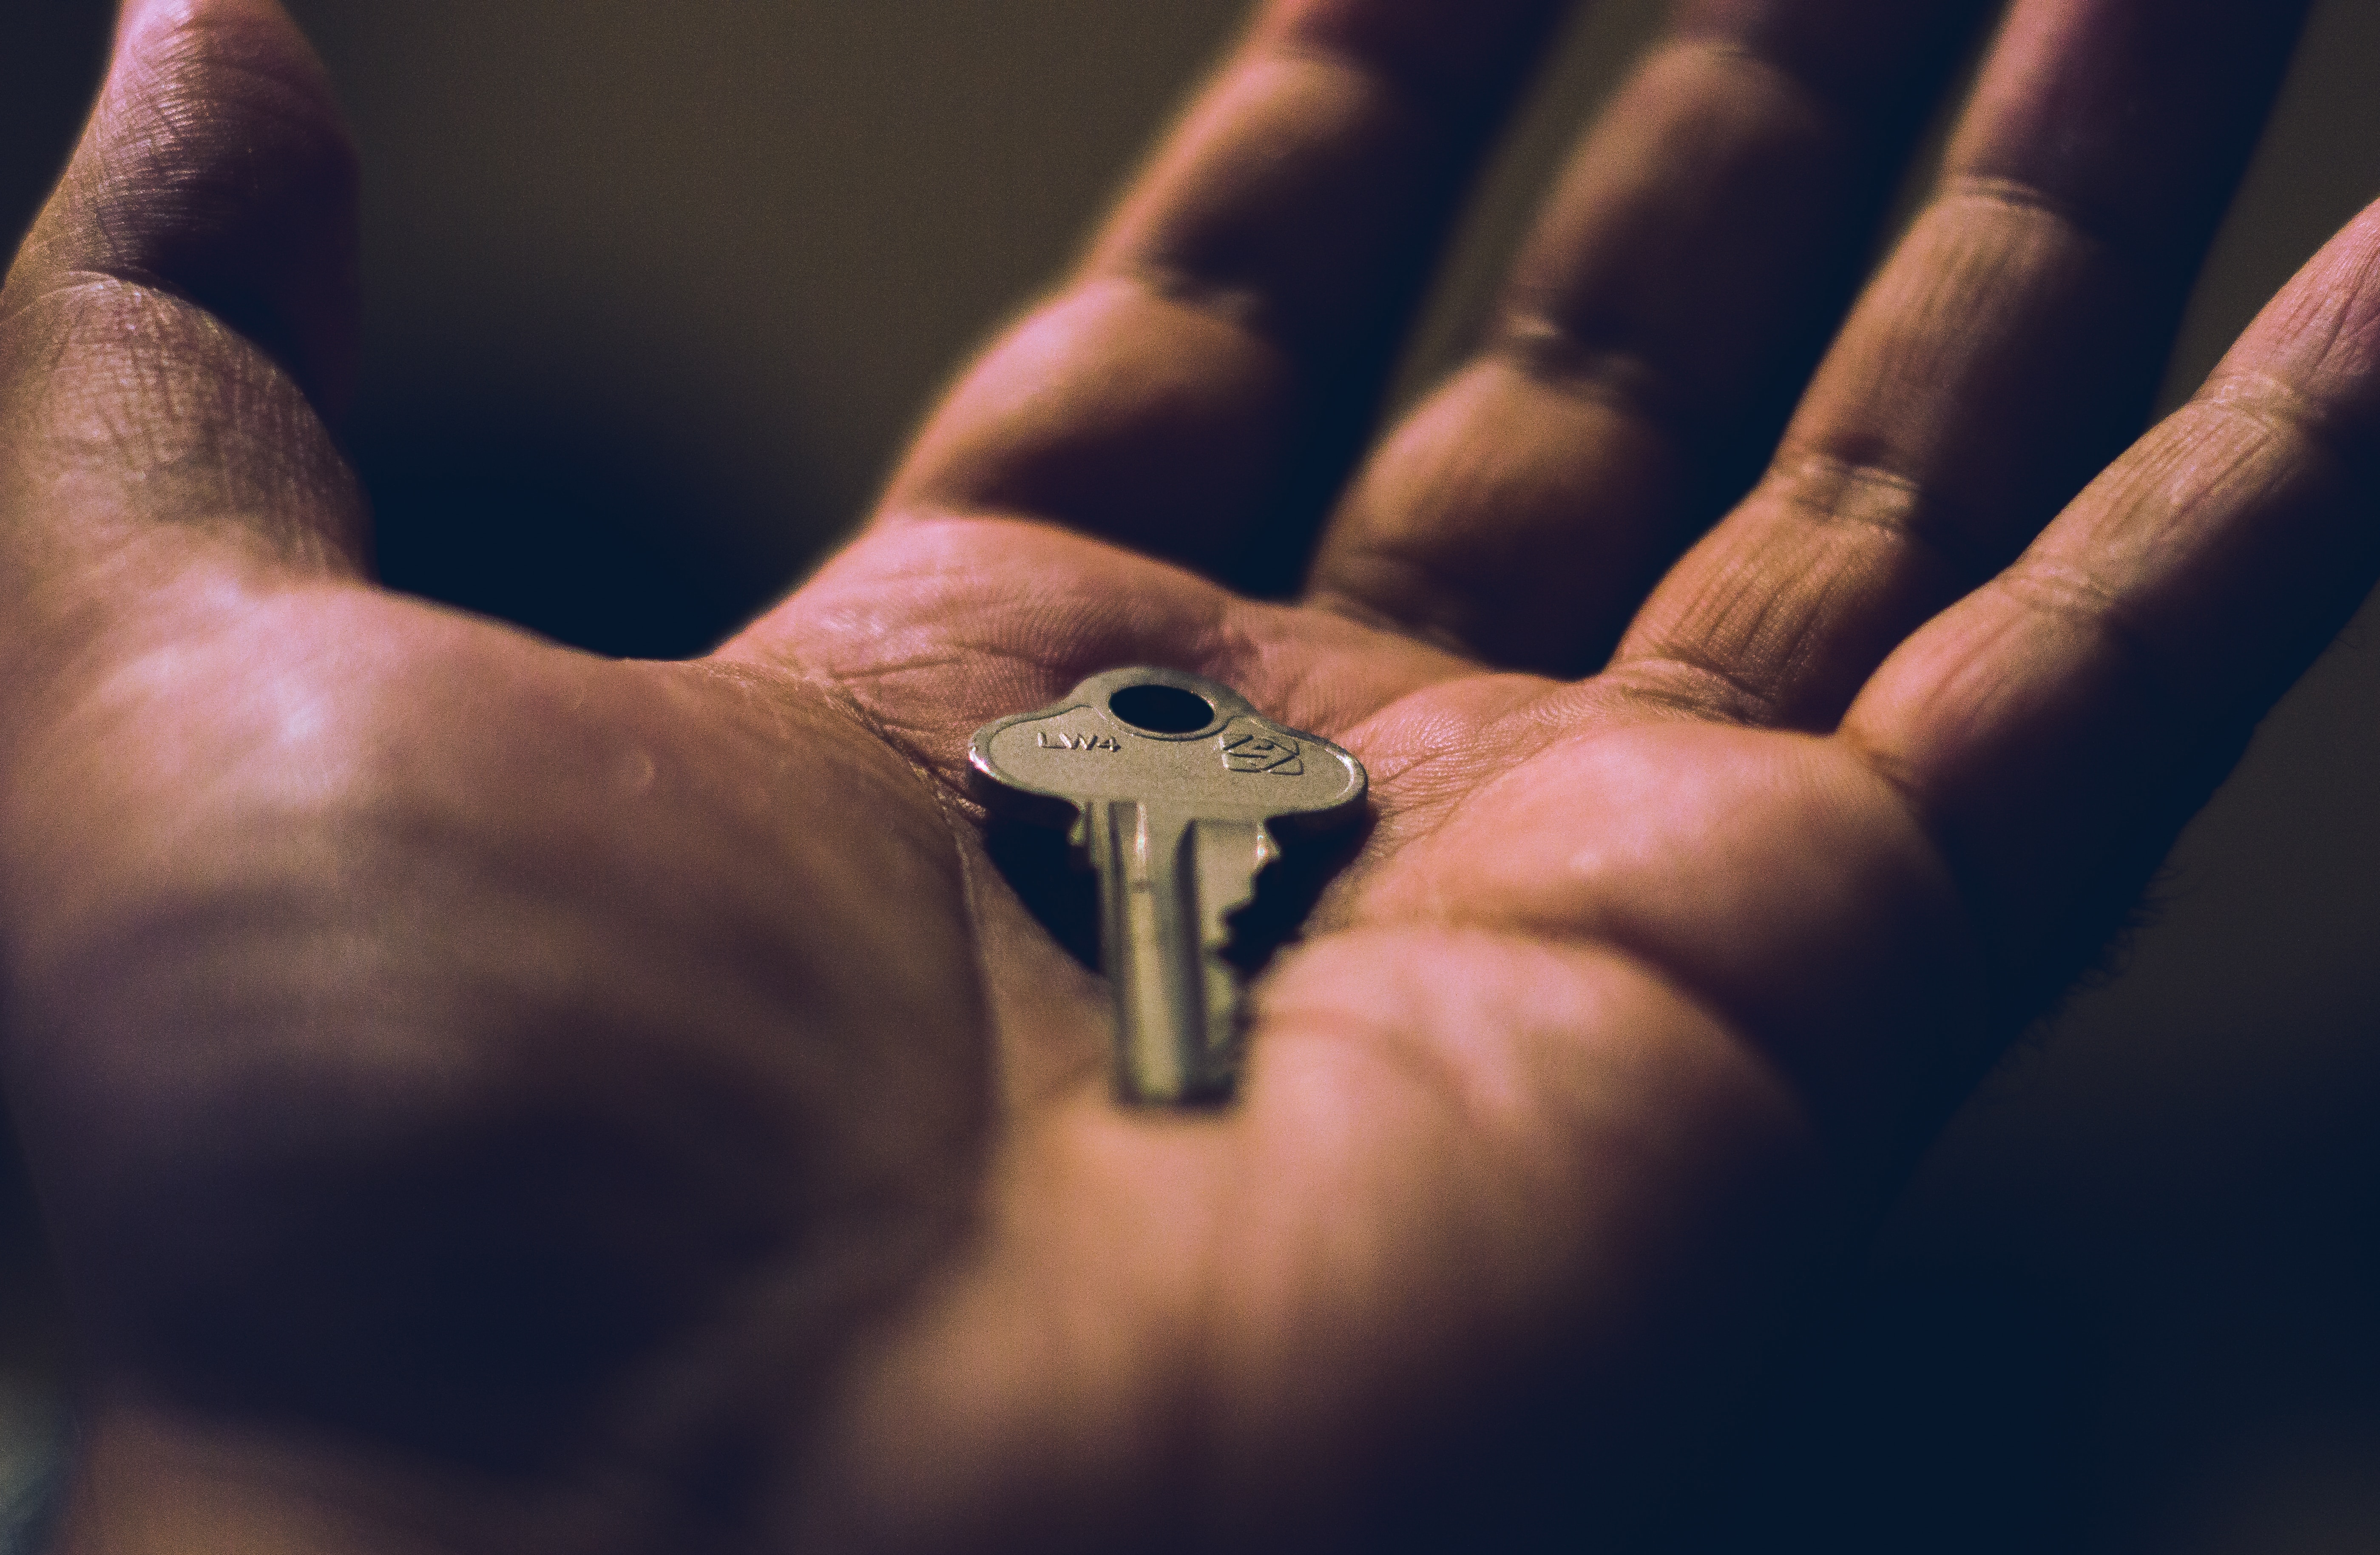 A key in a human hand